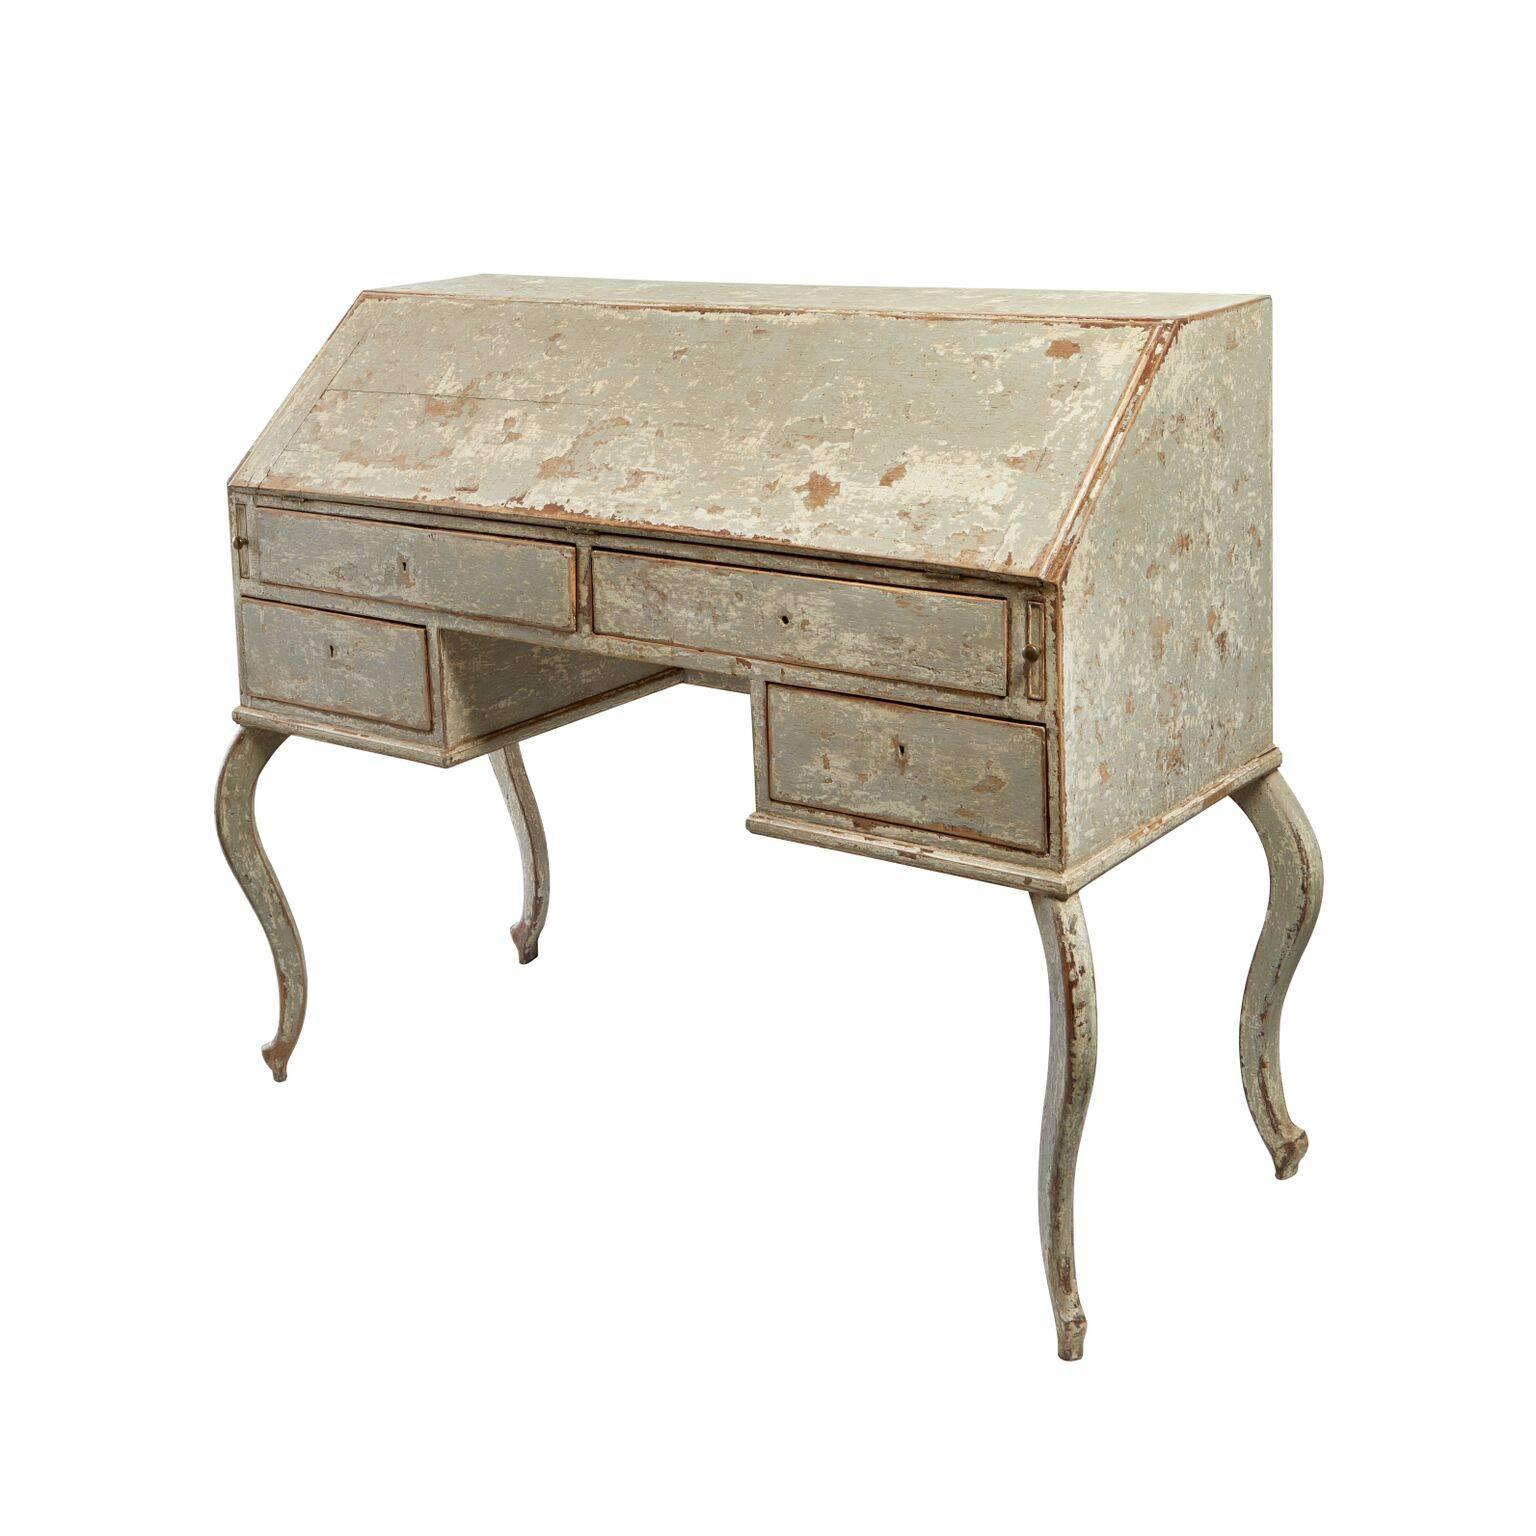 Early 19th century French painted secretary. Original paint in beautiful shades of celadon and white. Interior has original turquoise paint and natural wood tones. All the drawers are intact.